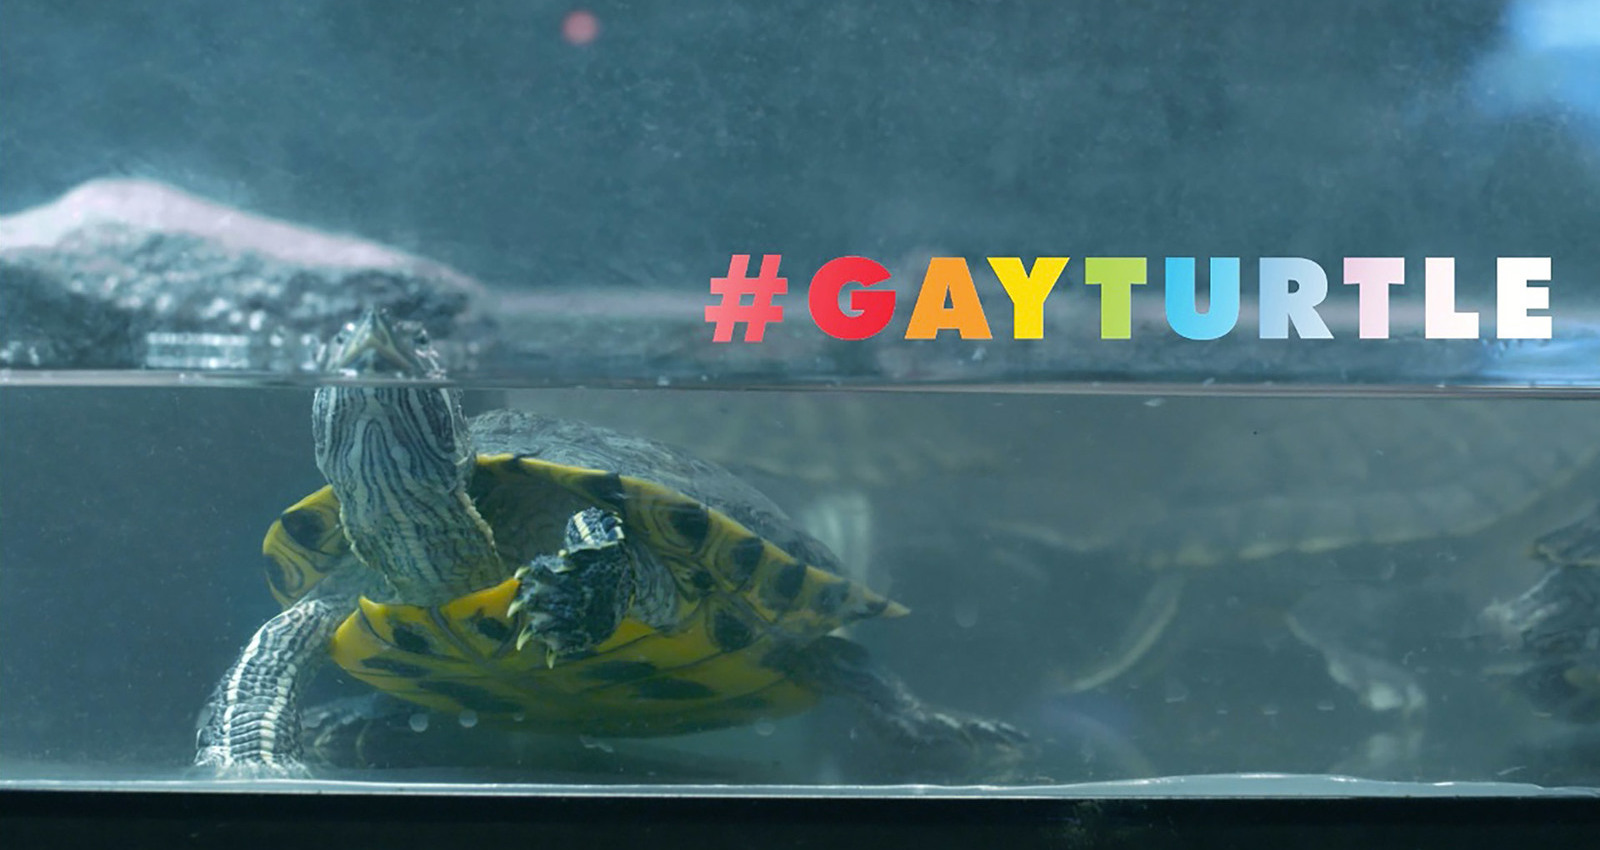 GAY TURTLE